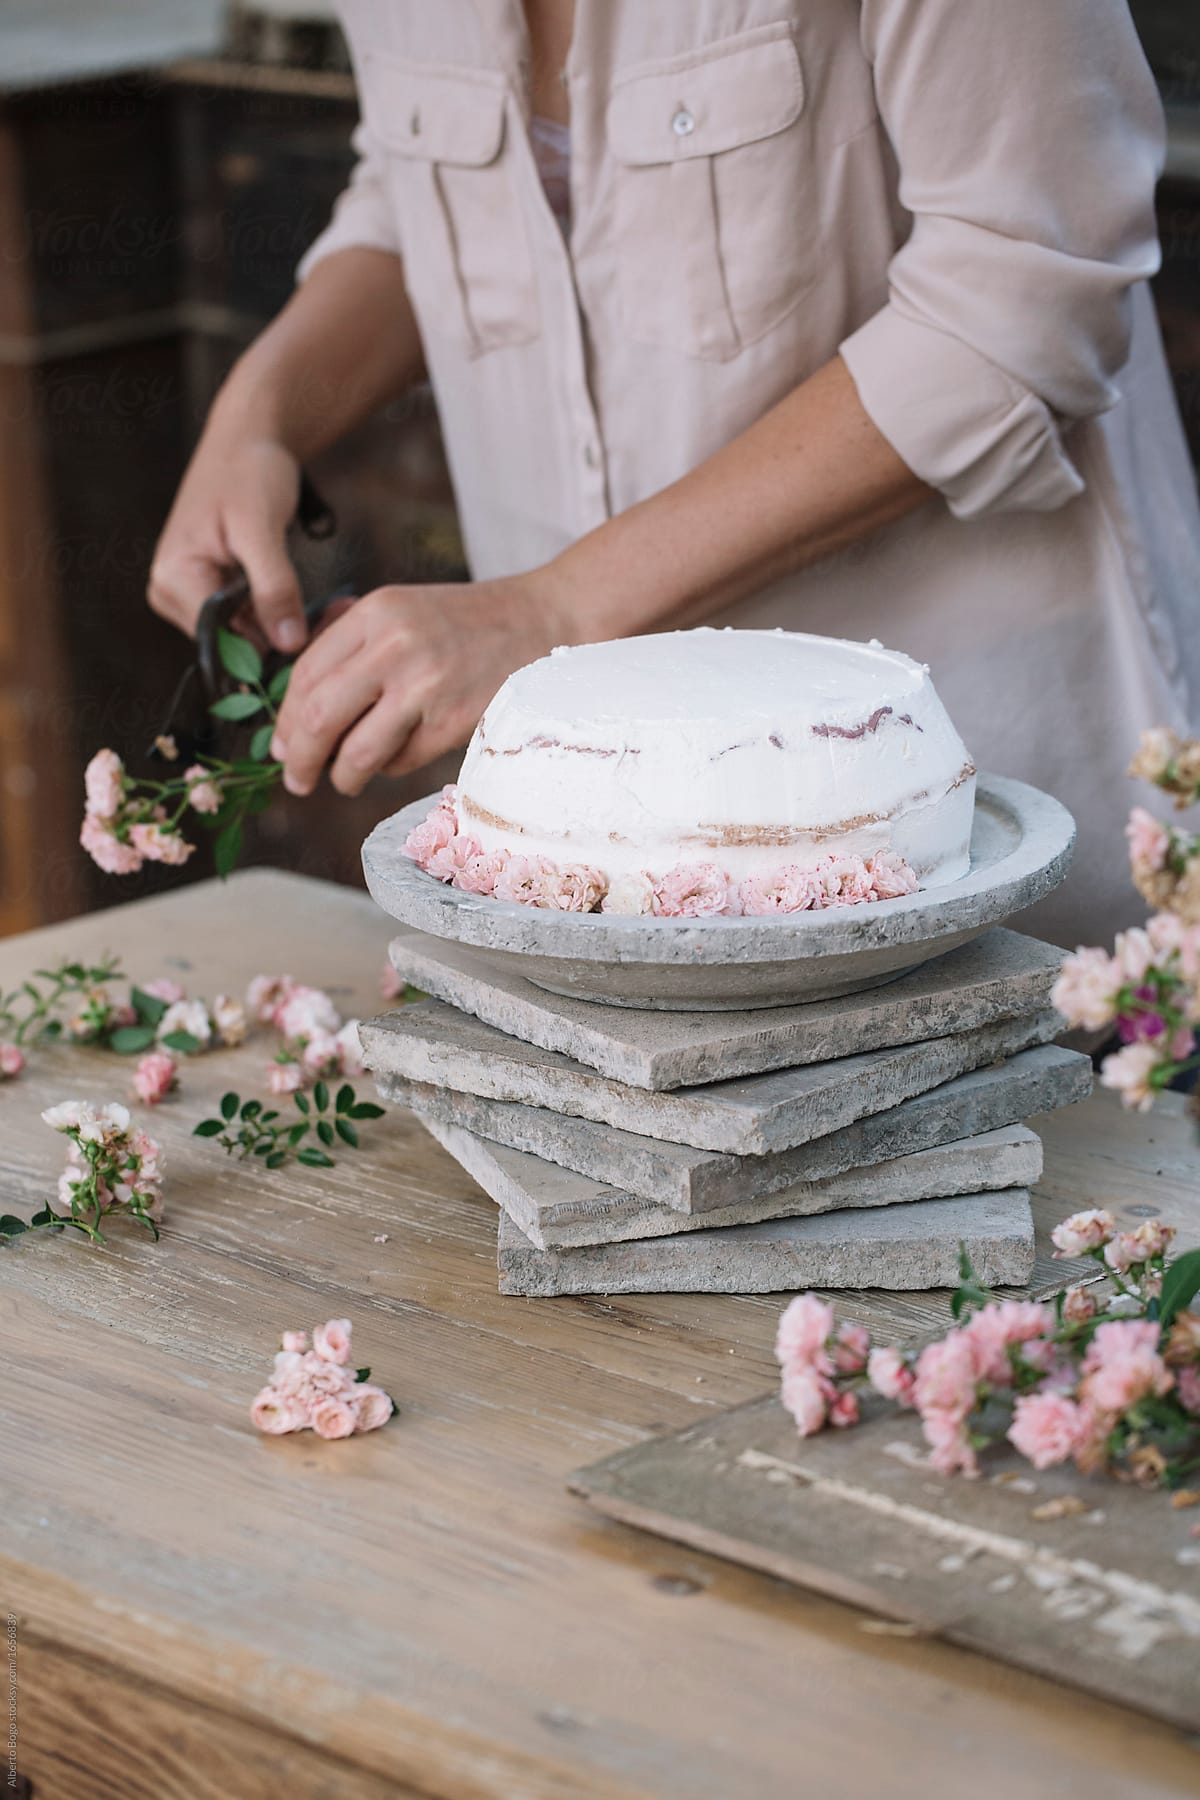 Person cutting flowers for cake